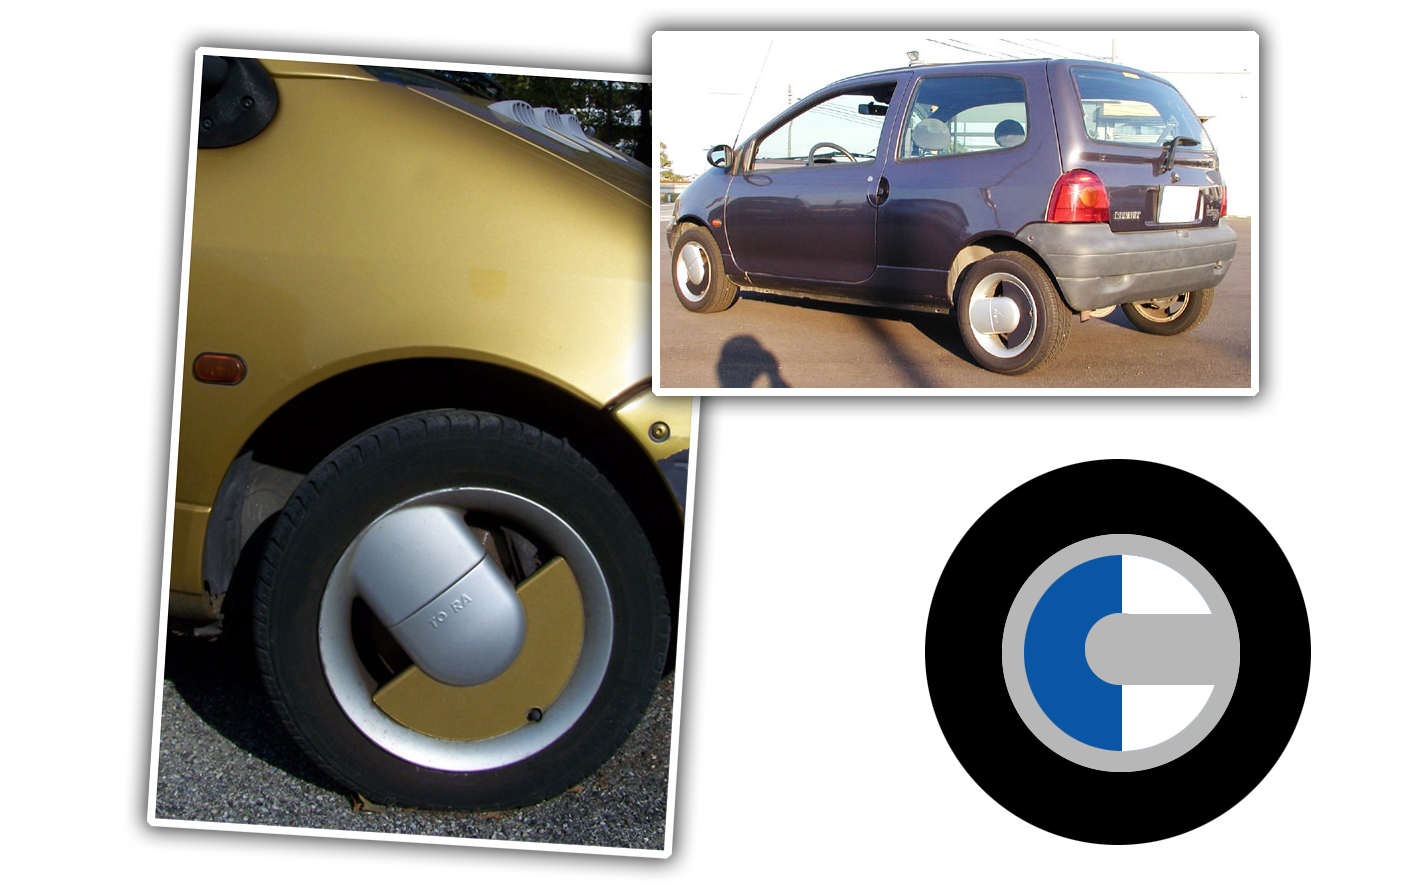 Has There Ever Been A Car/Wheel Combo That Fits Better Than This Twingo And These Weird Wheels?